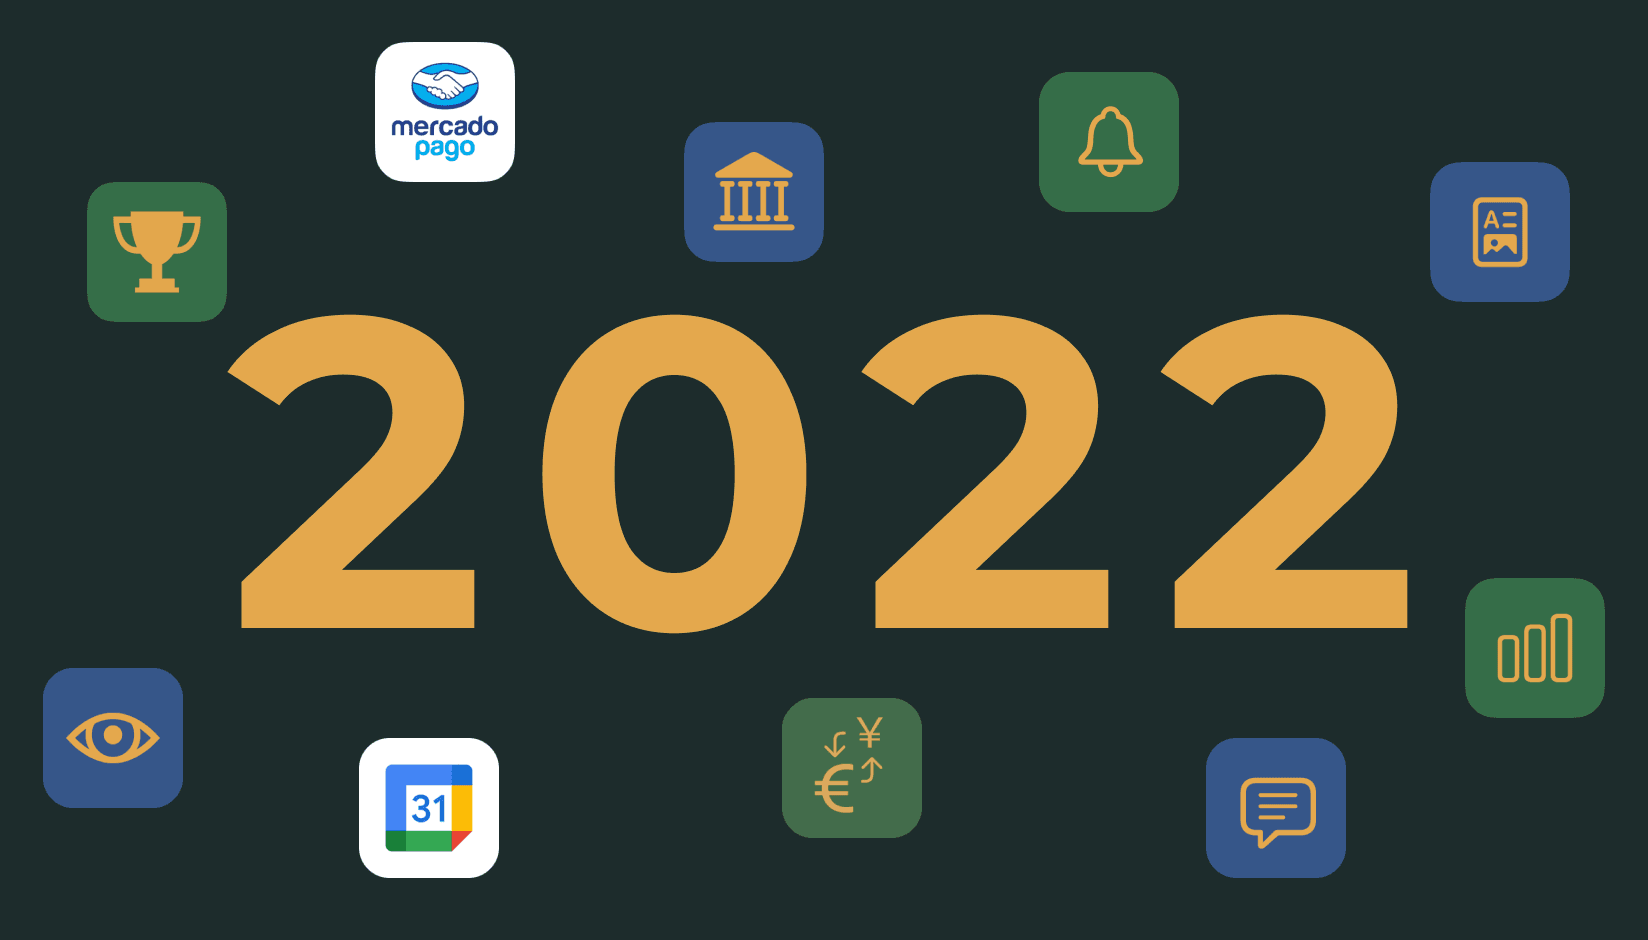 The 2022 Year in Review